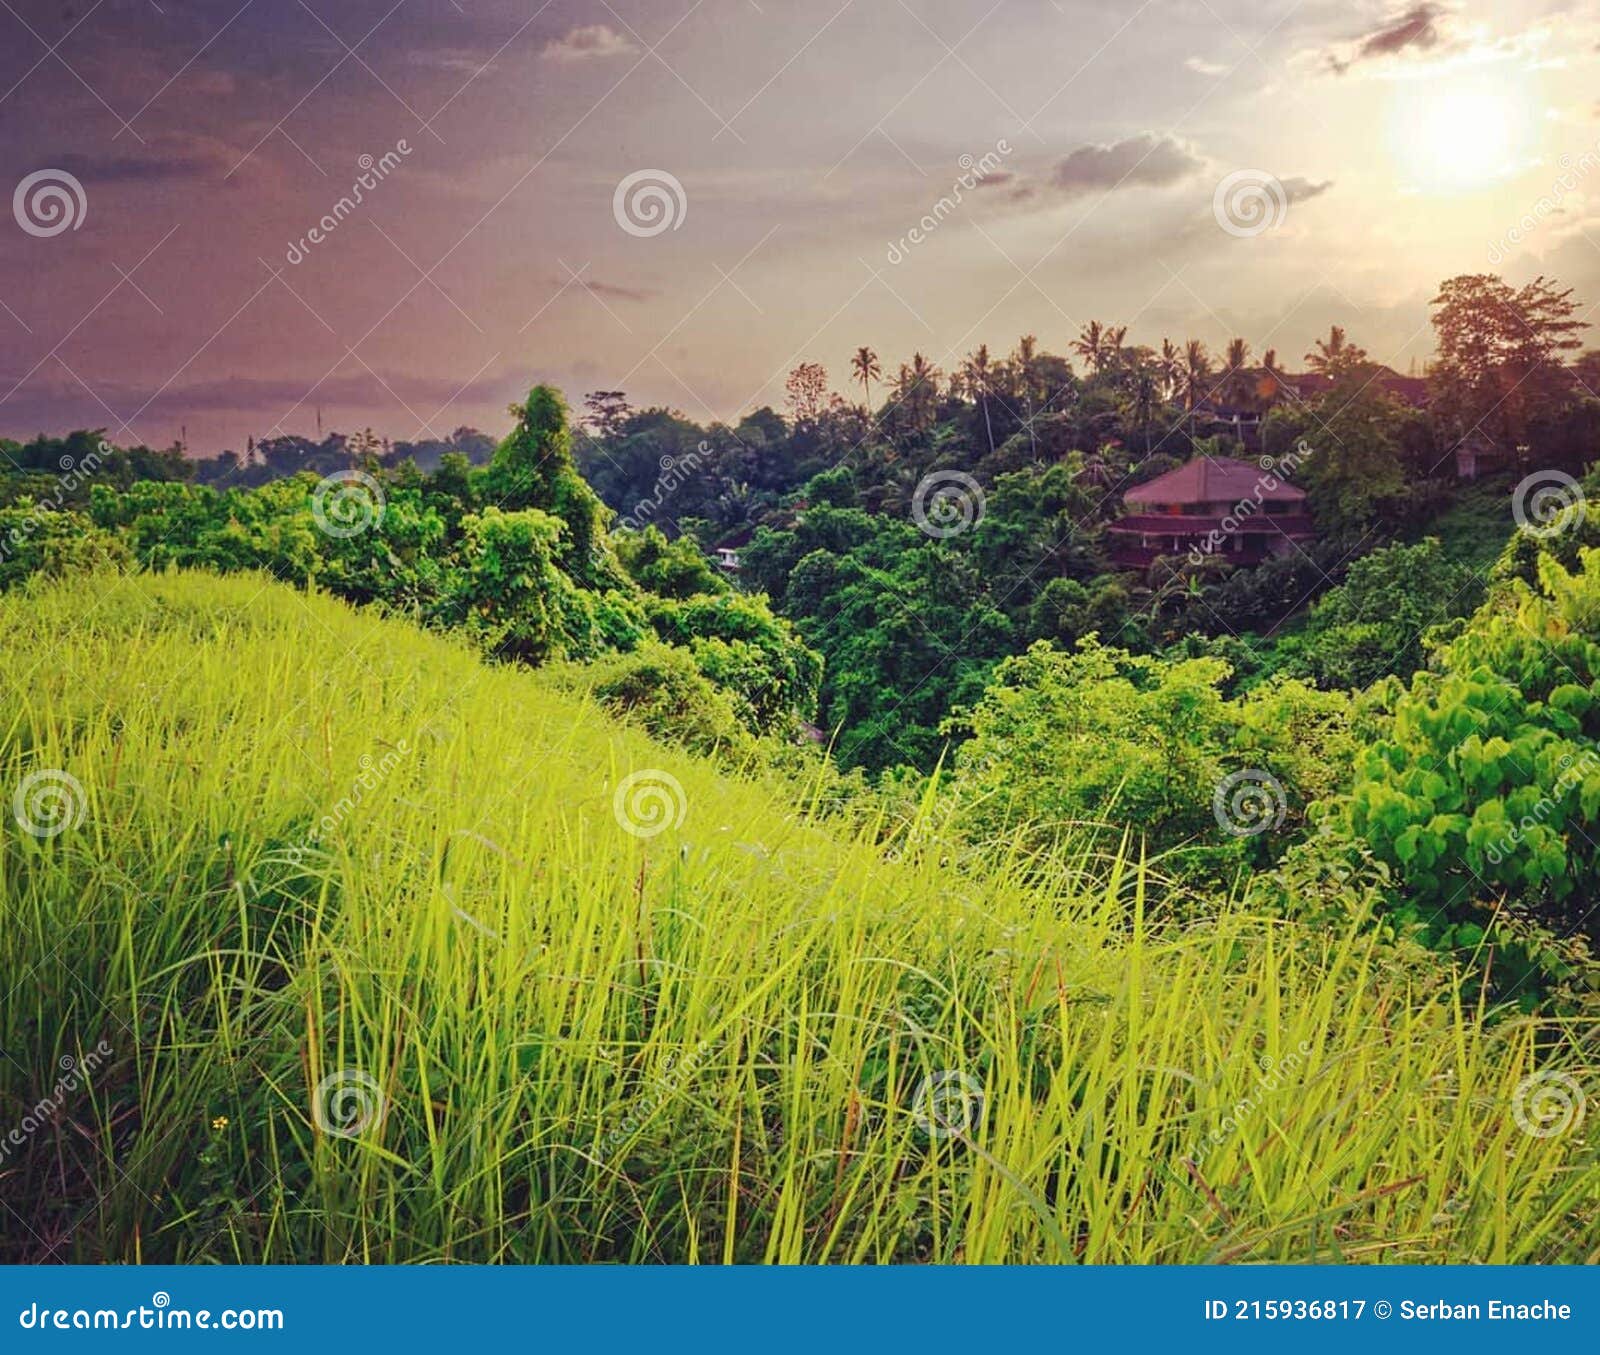 rice fields in campuhan ridge walk. #campuhan #ubud #bali #ricefields #ridgeback #indonesia check out my photo on dreamstime
https